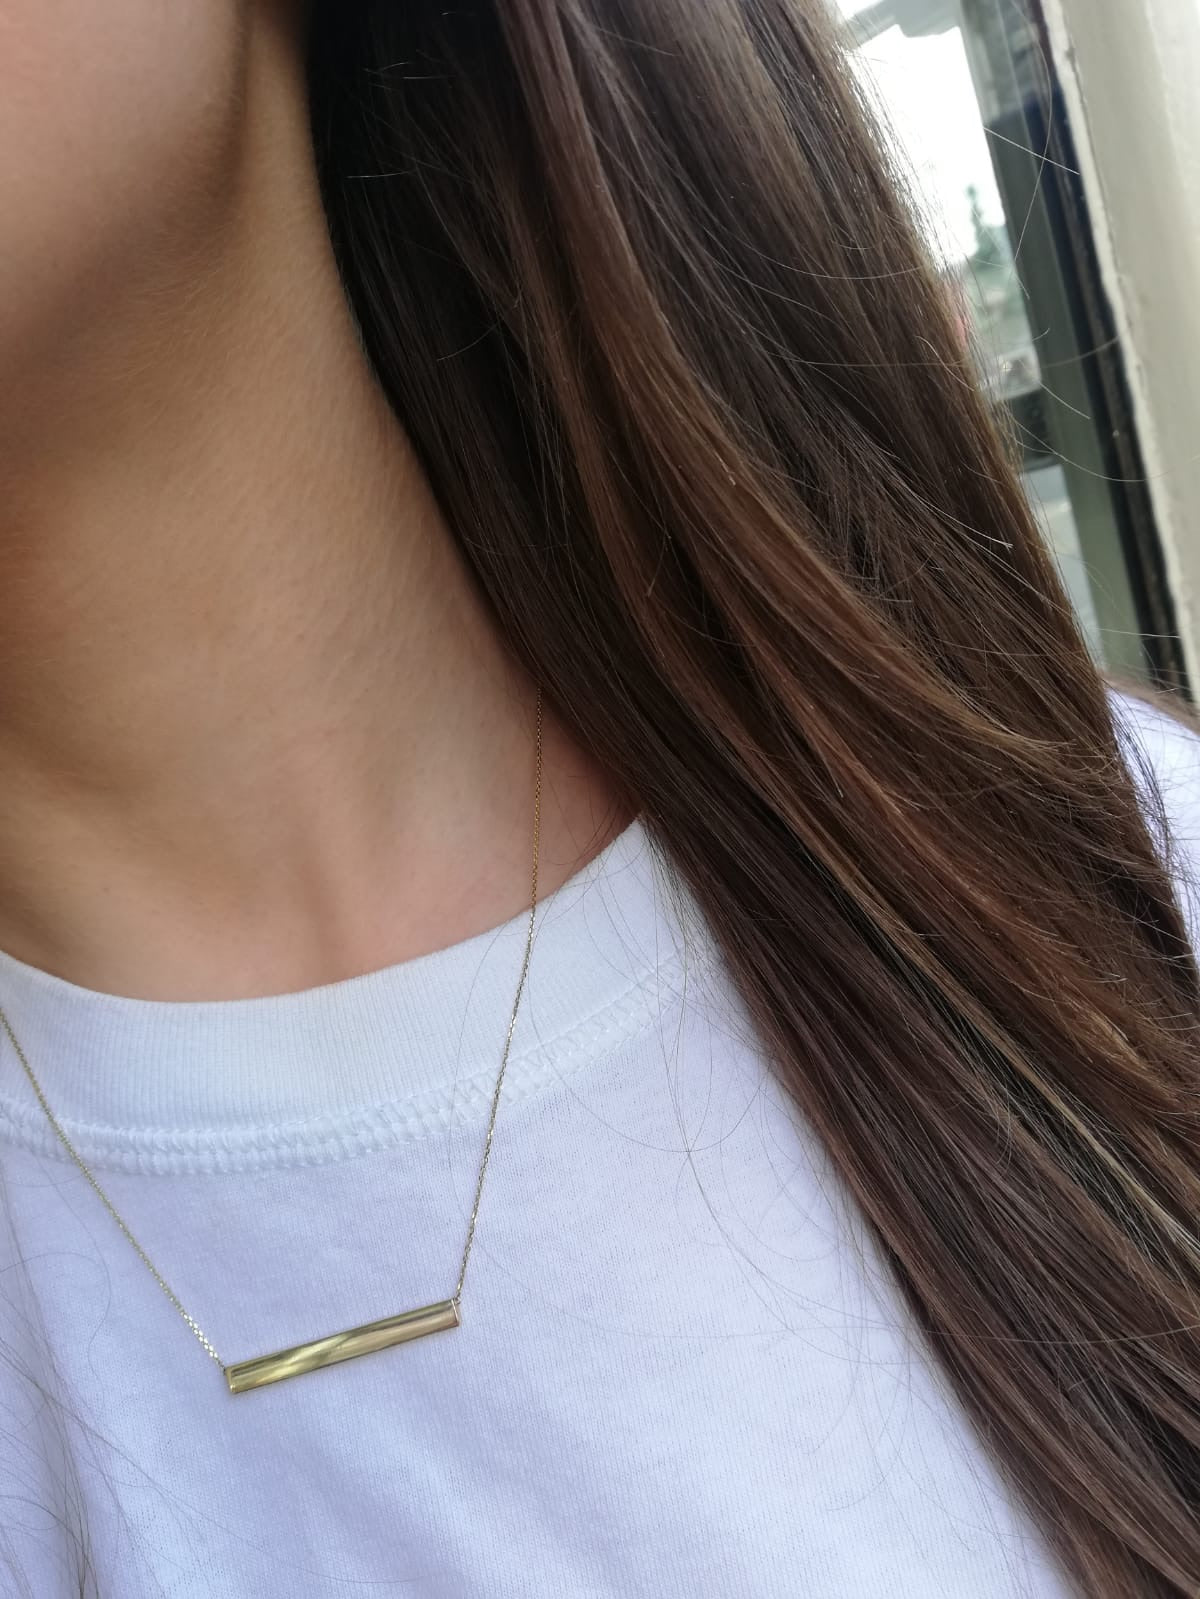 9ct Yellow Gold Bar Necklace - John Ross Jewellers